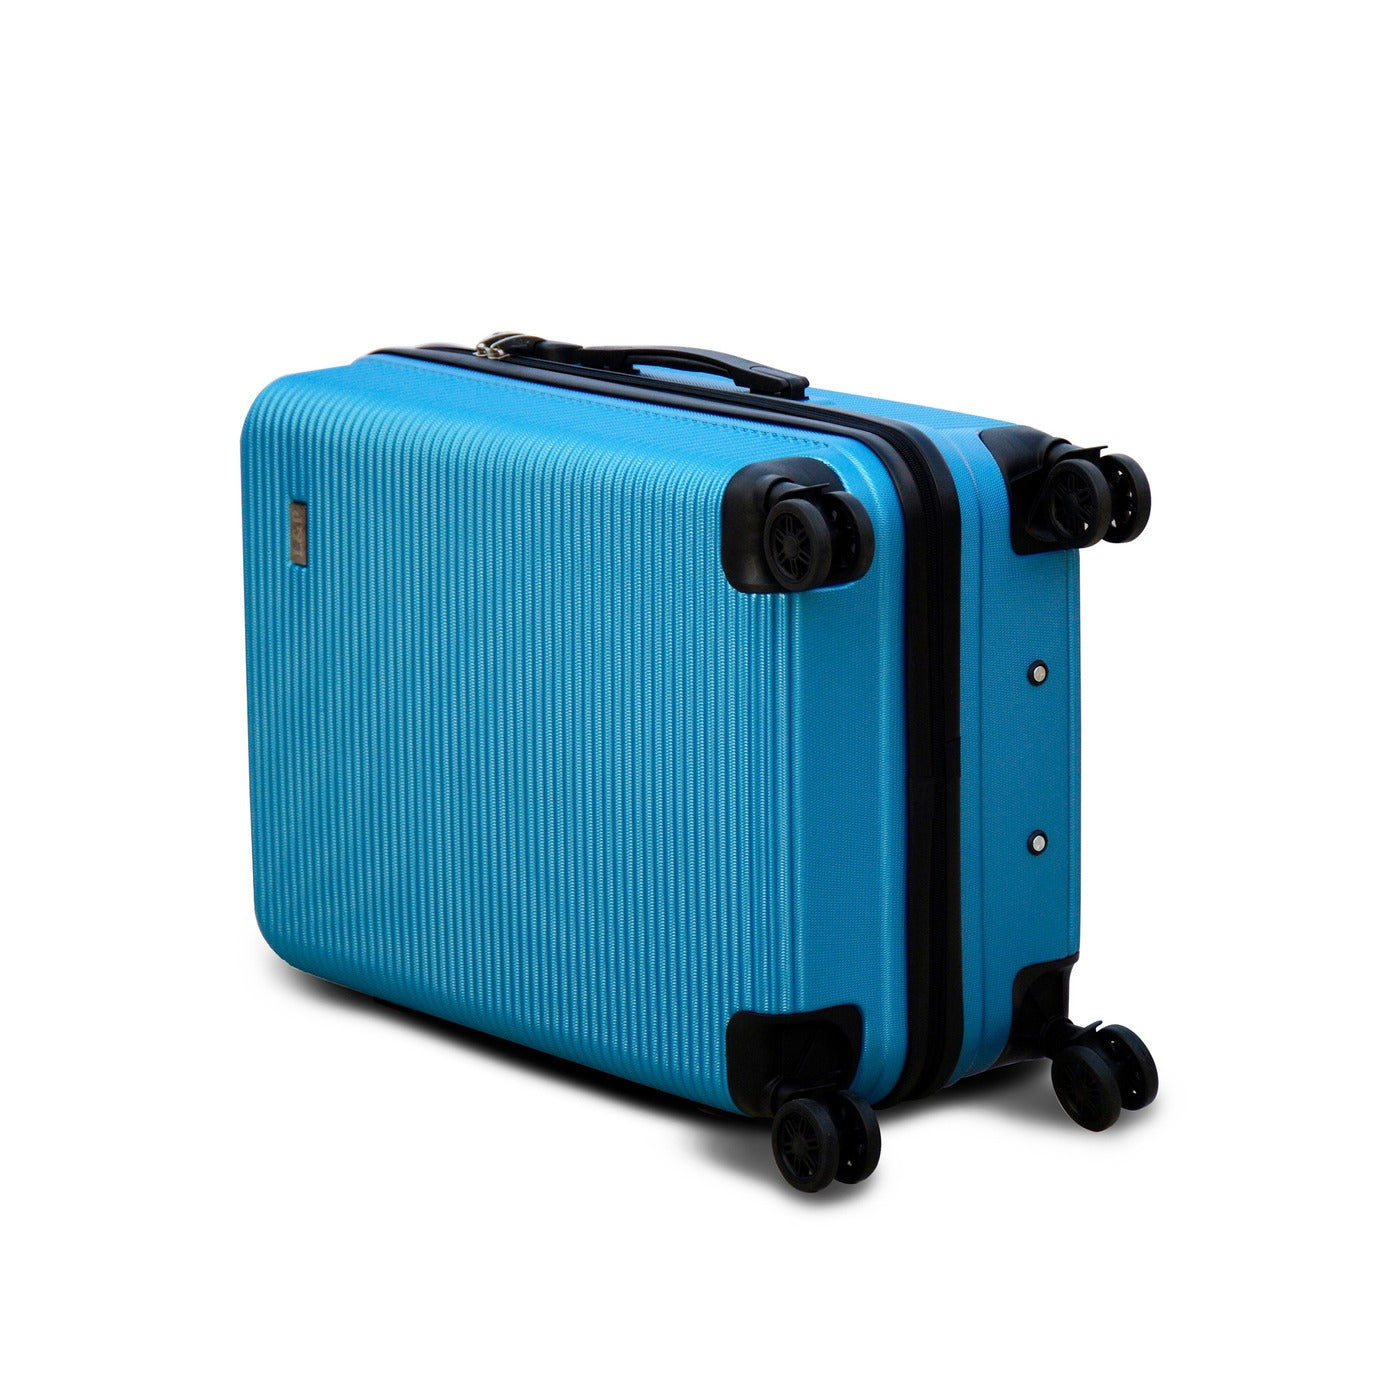 24" Light Blue Colour JIAN ABS Line Luggage Lightweight Hard Case Trolley Bag With Spinner Wheel